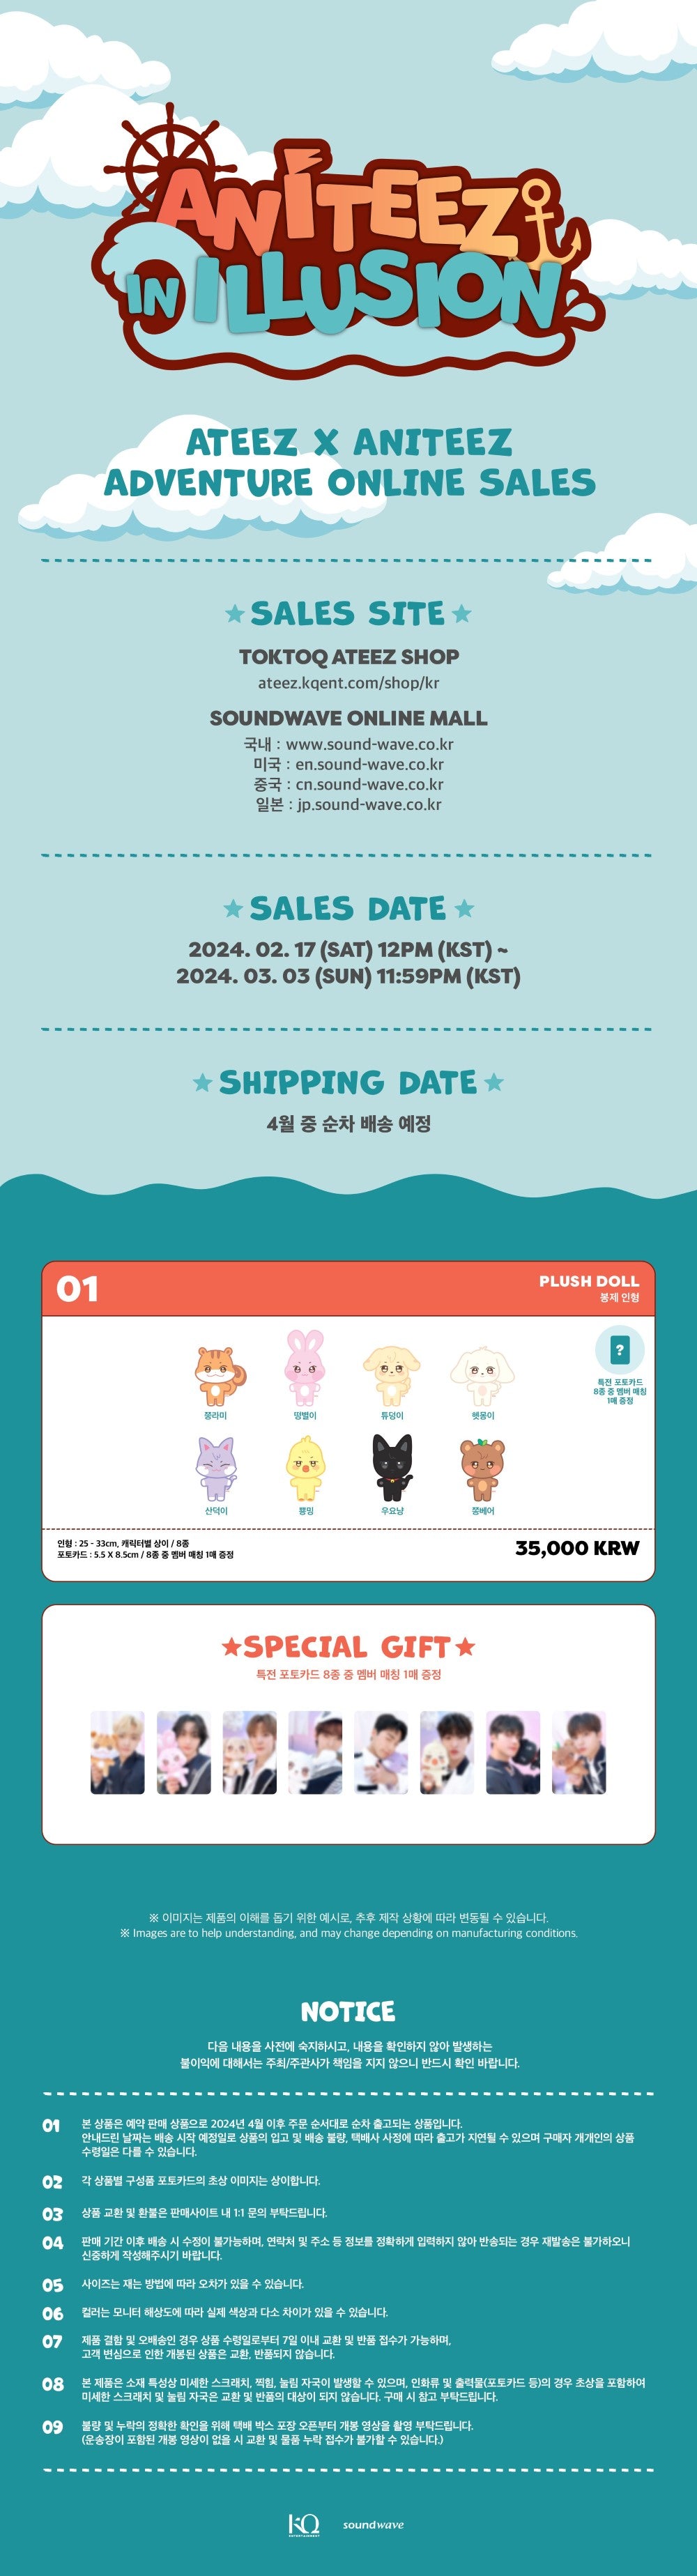 [PRE-ORDER] ATEEZ - Plush Doll [ANITEEZ IN ILLUSION Official MD]